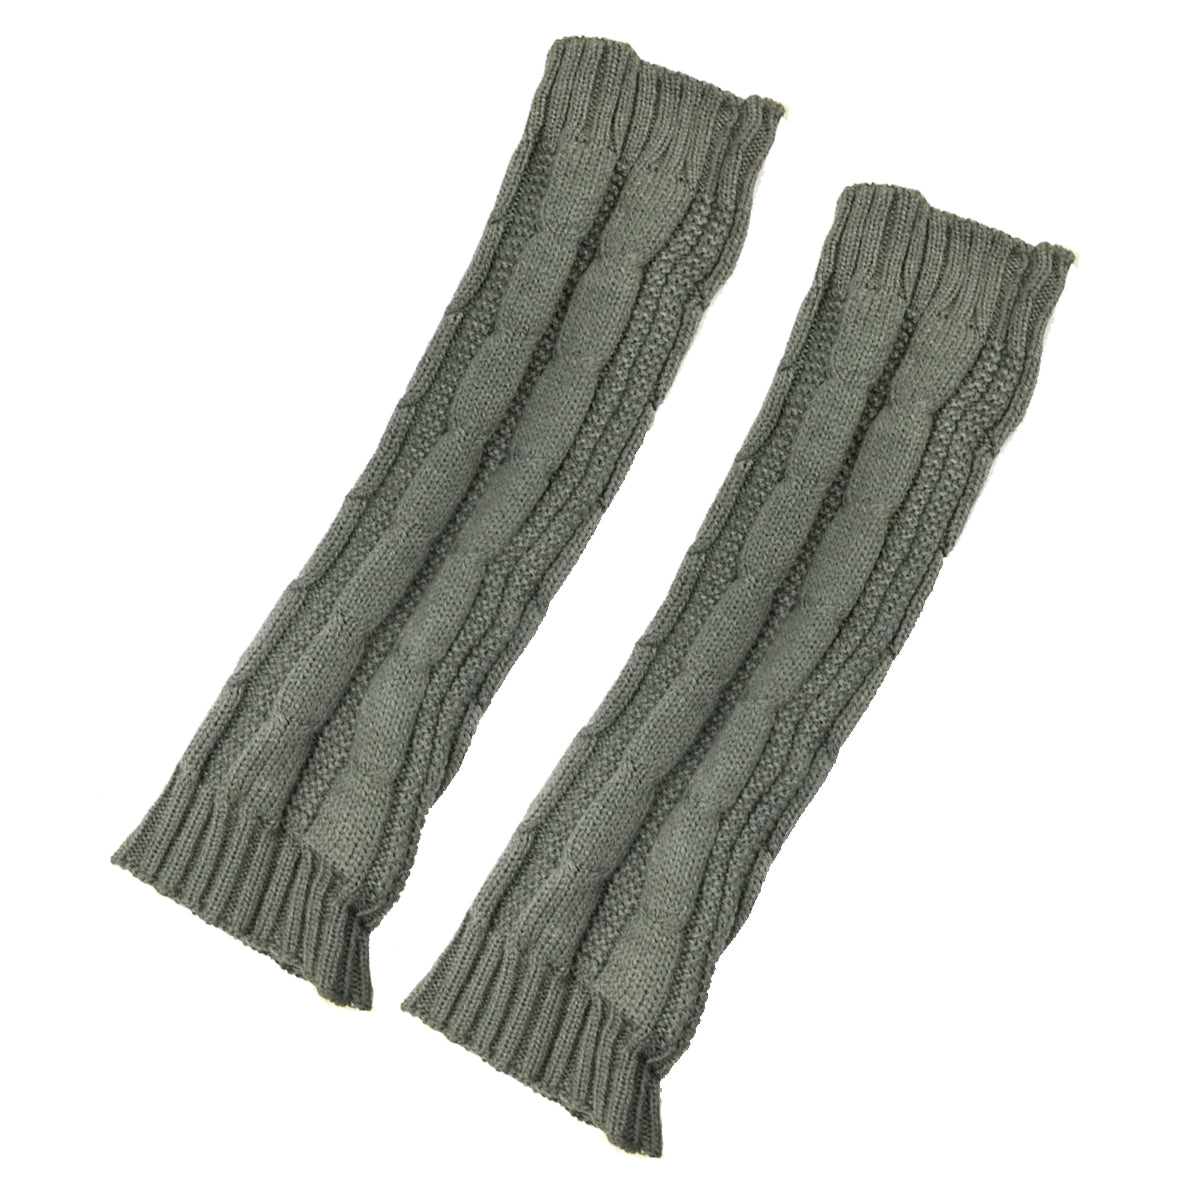 Wrapables Soft Knitted Women's Leg Warmers